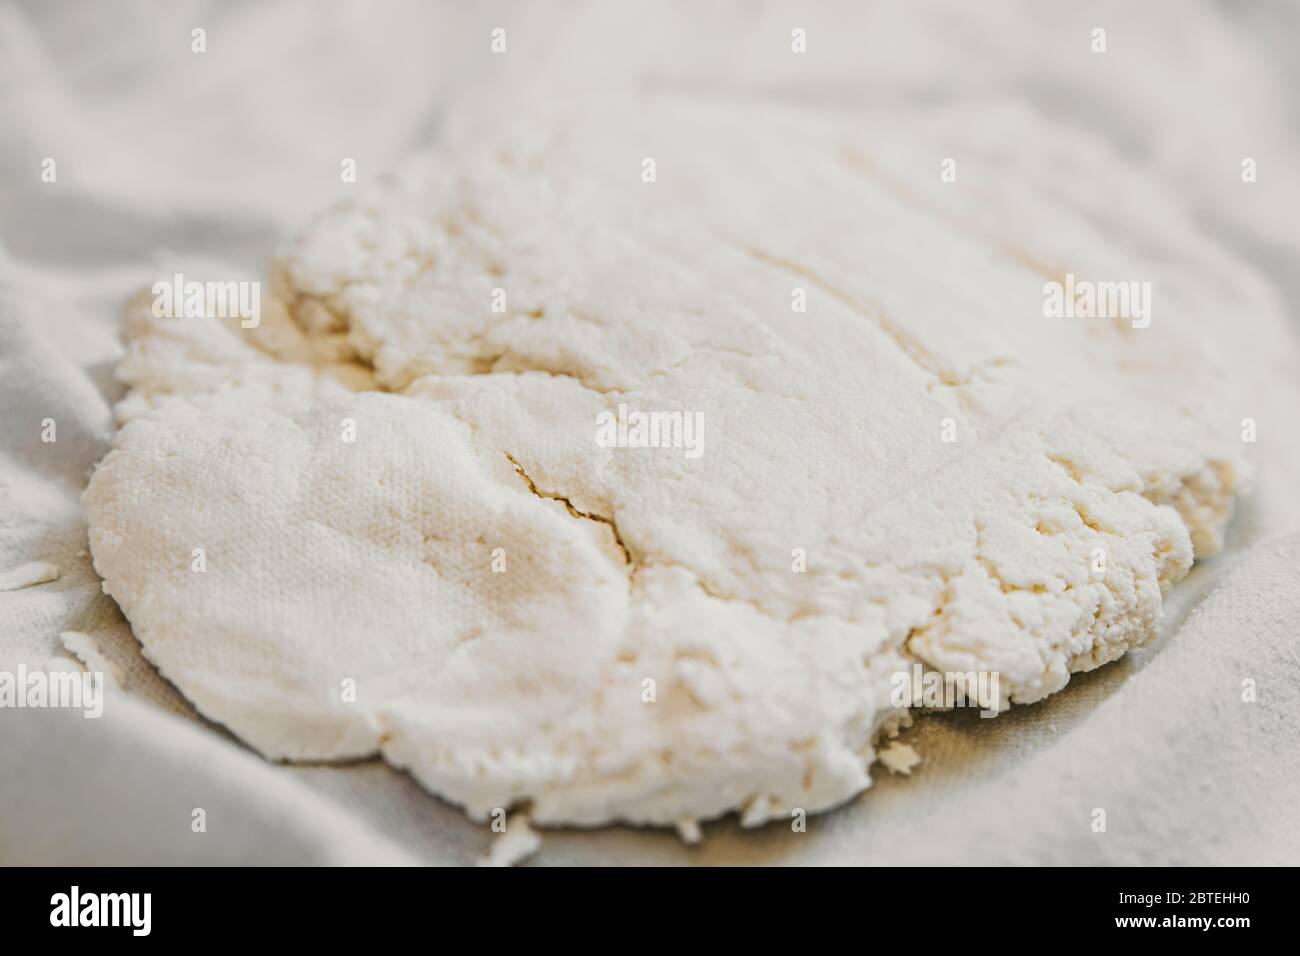 Fresh cheese making process, wrung cottage cheese or paneer on cotton cloth, homemade Stock Photo